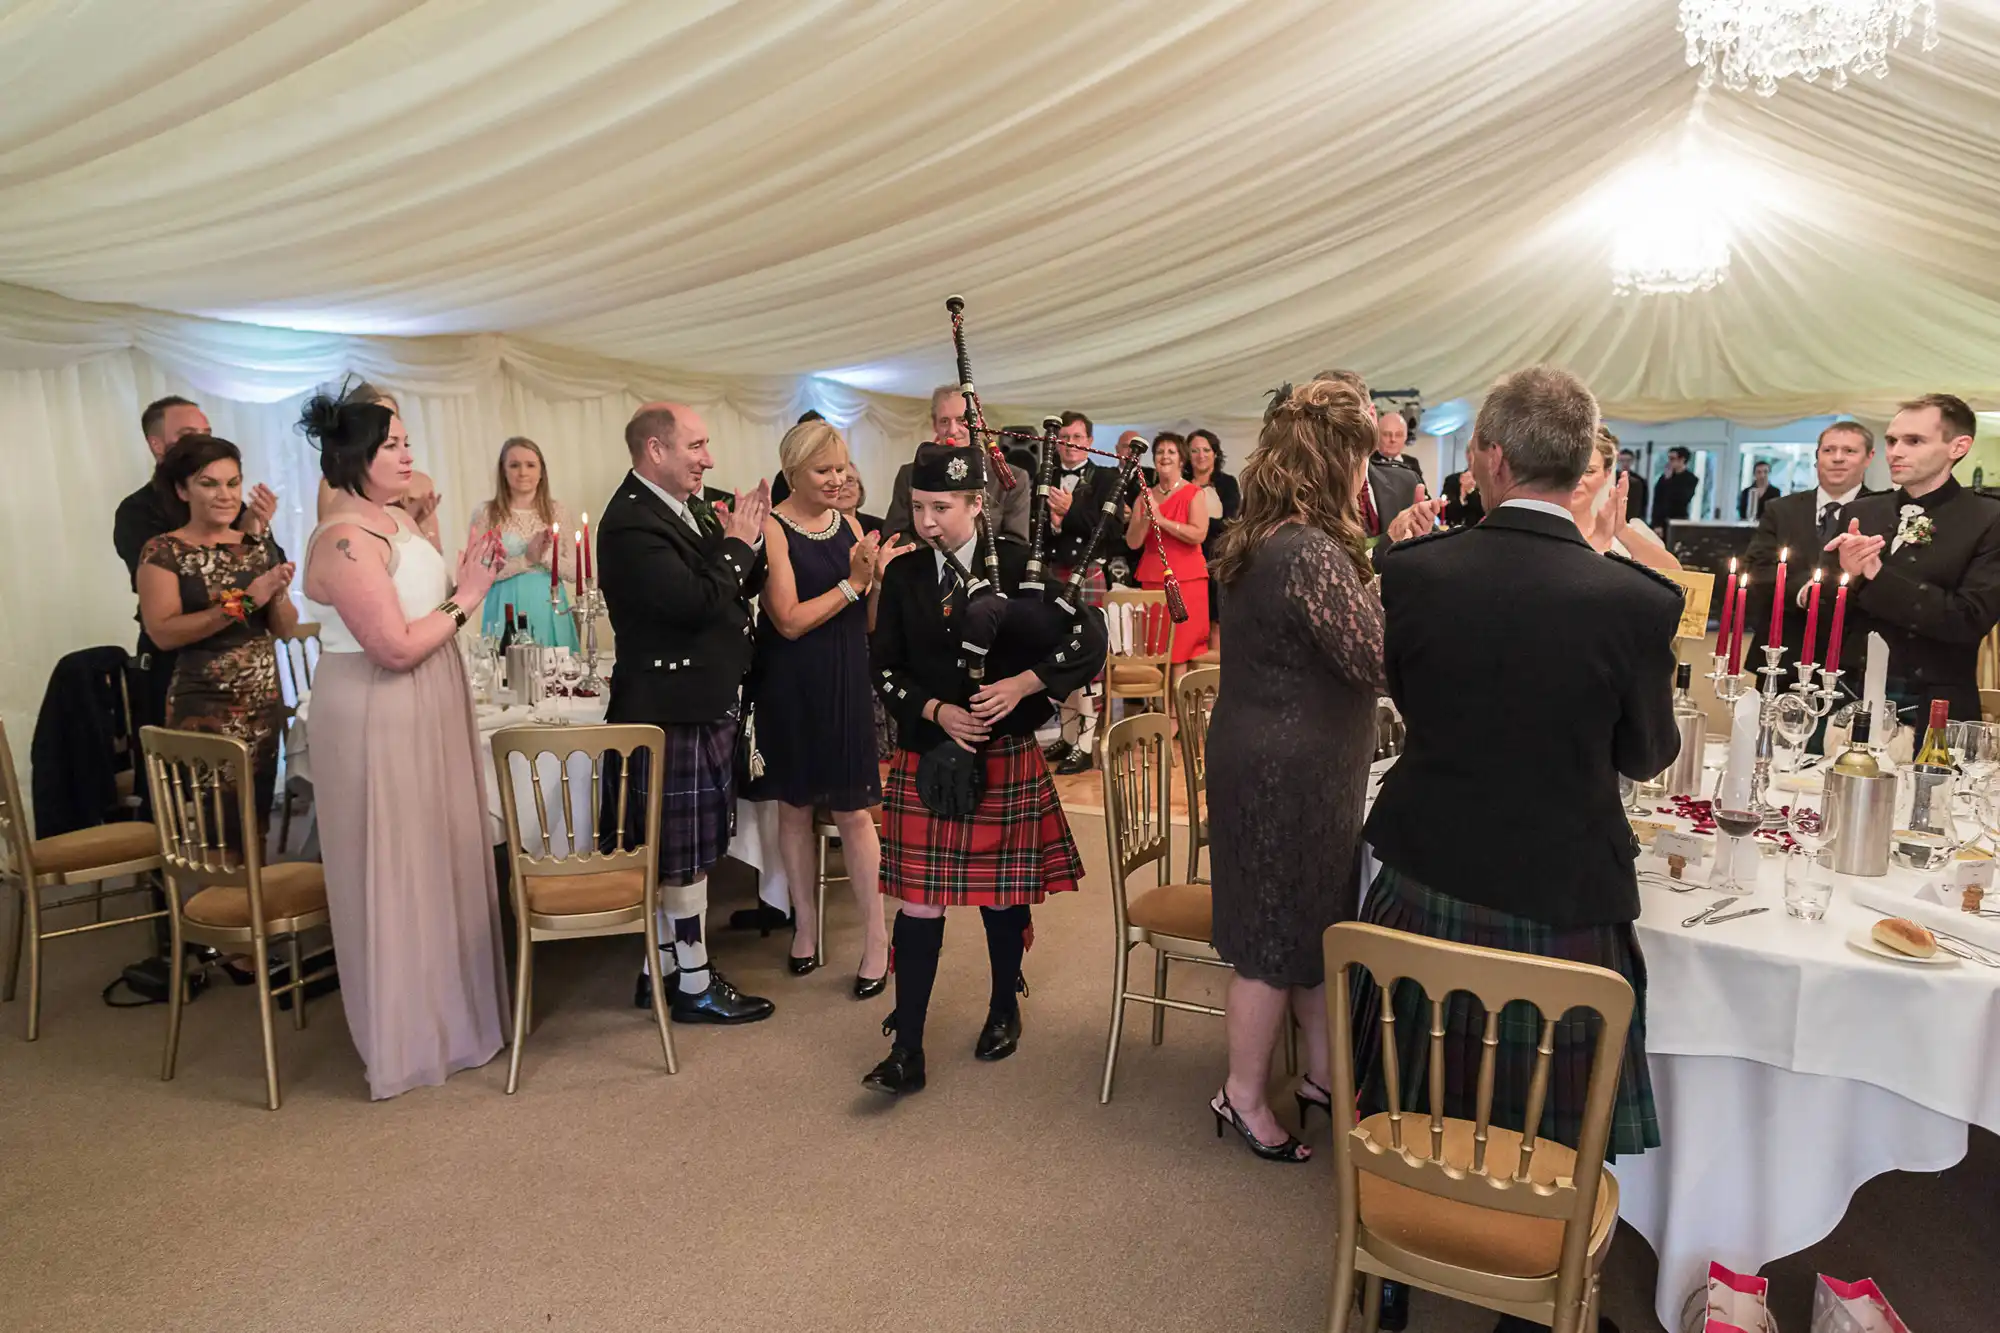 Guests applauding a bagpiper in traditional scottish attire walking through a banquet tent at a formal event.